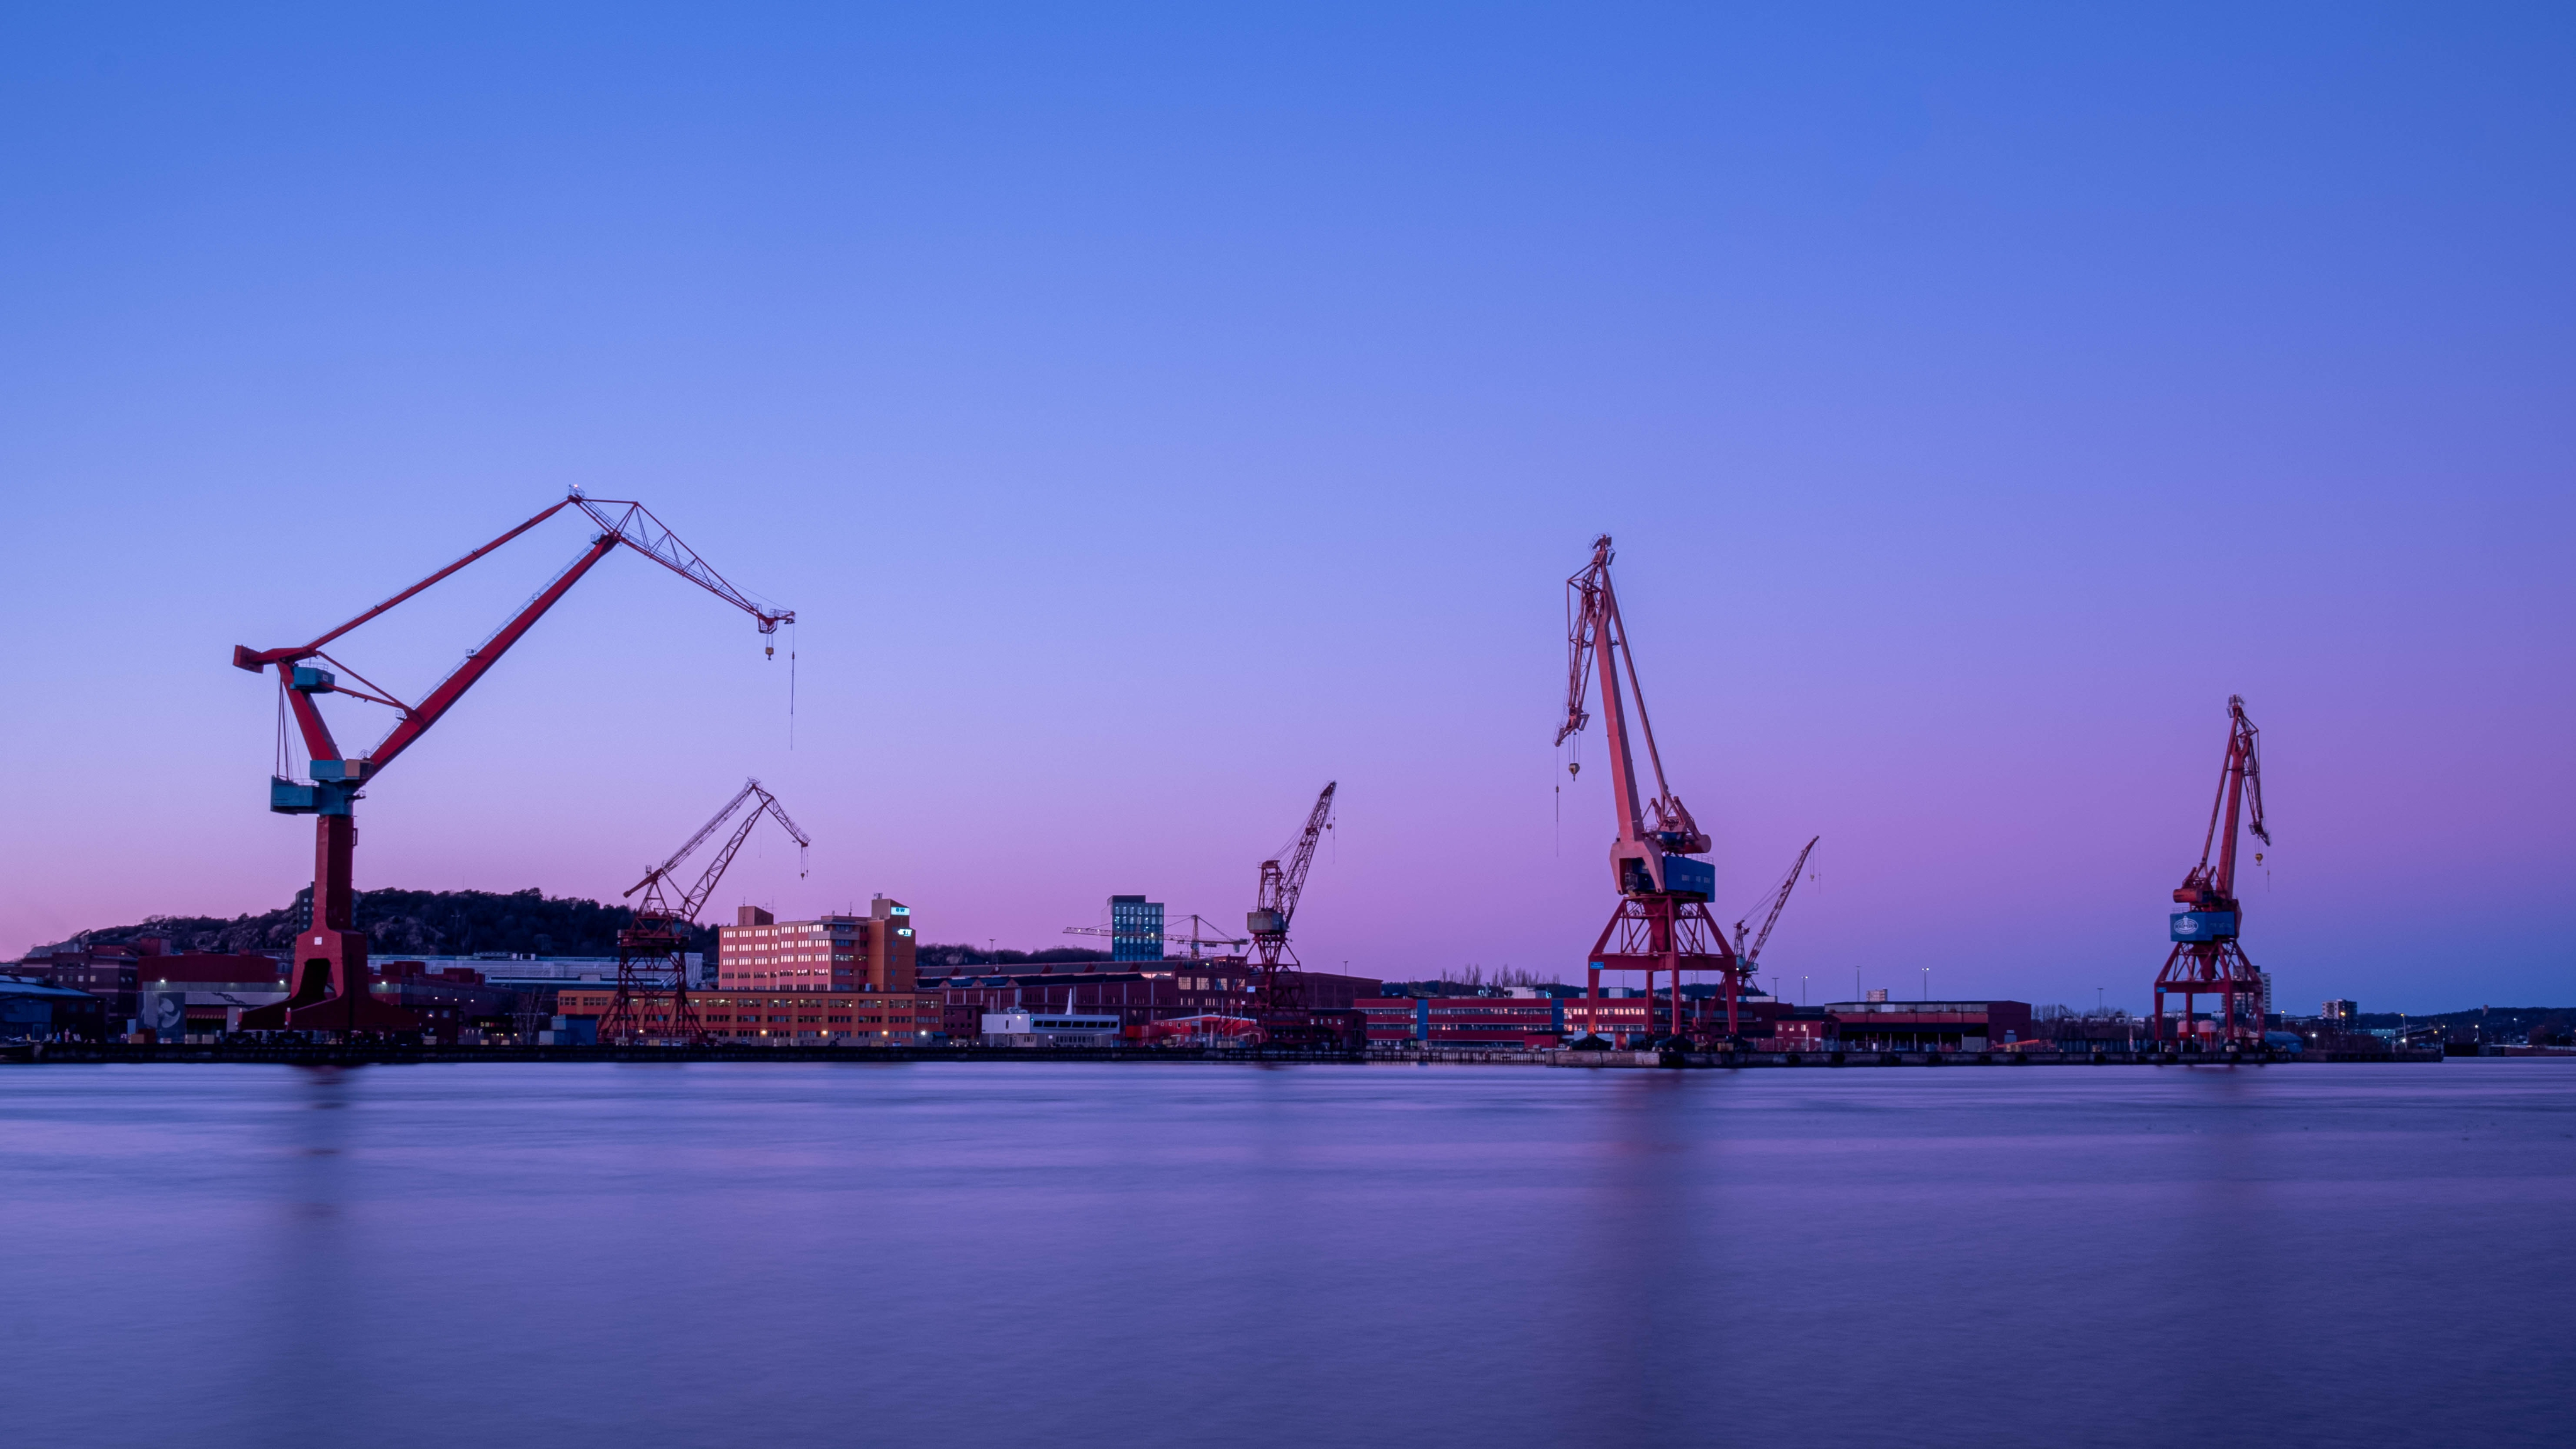 View of Gothenburg and it's harbour cranes